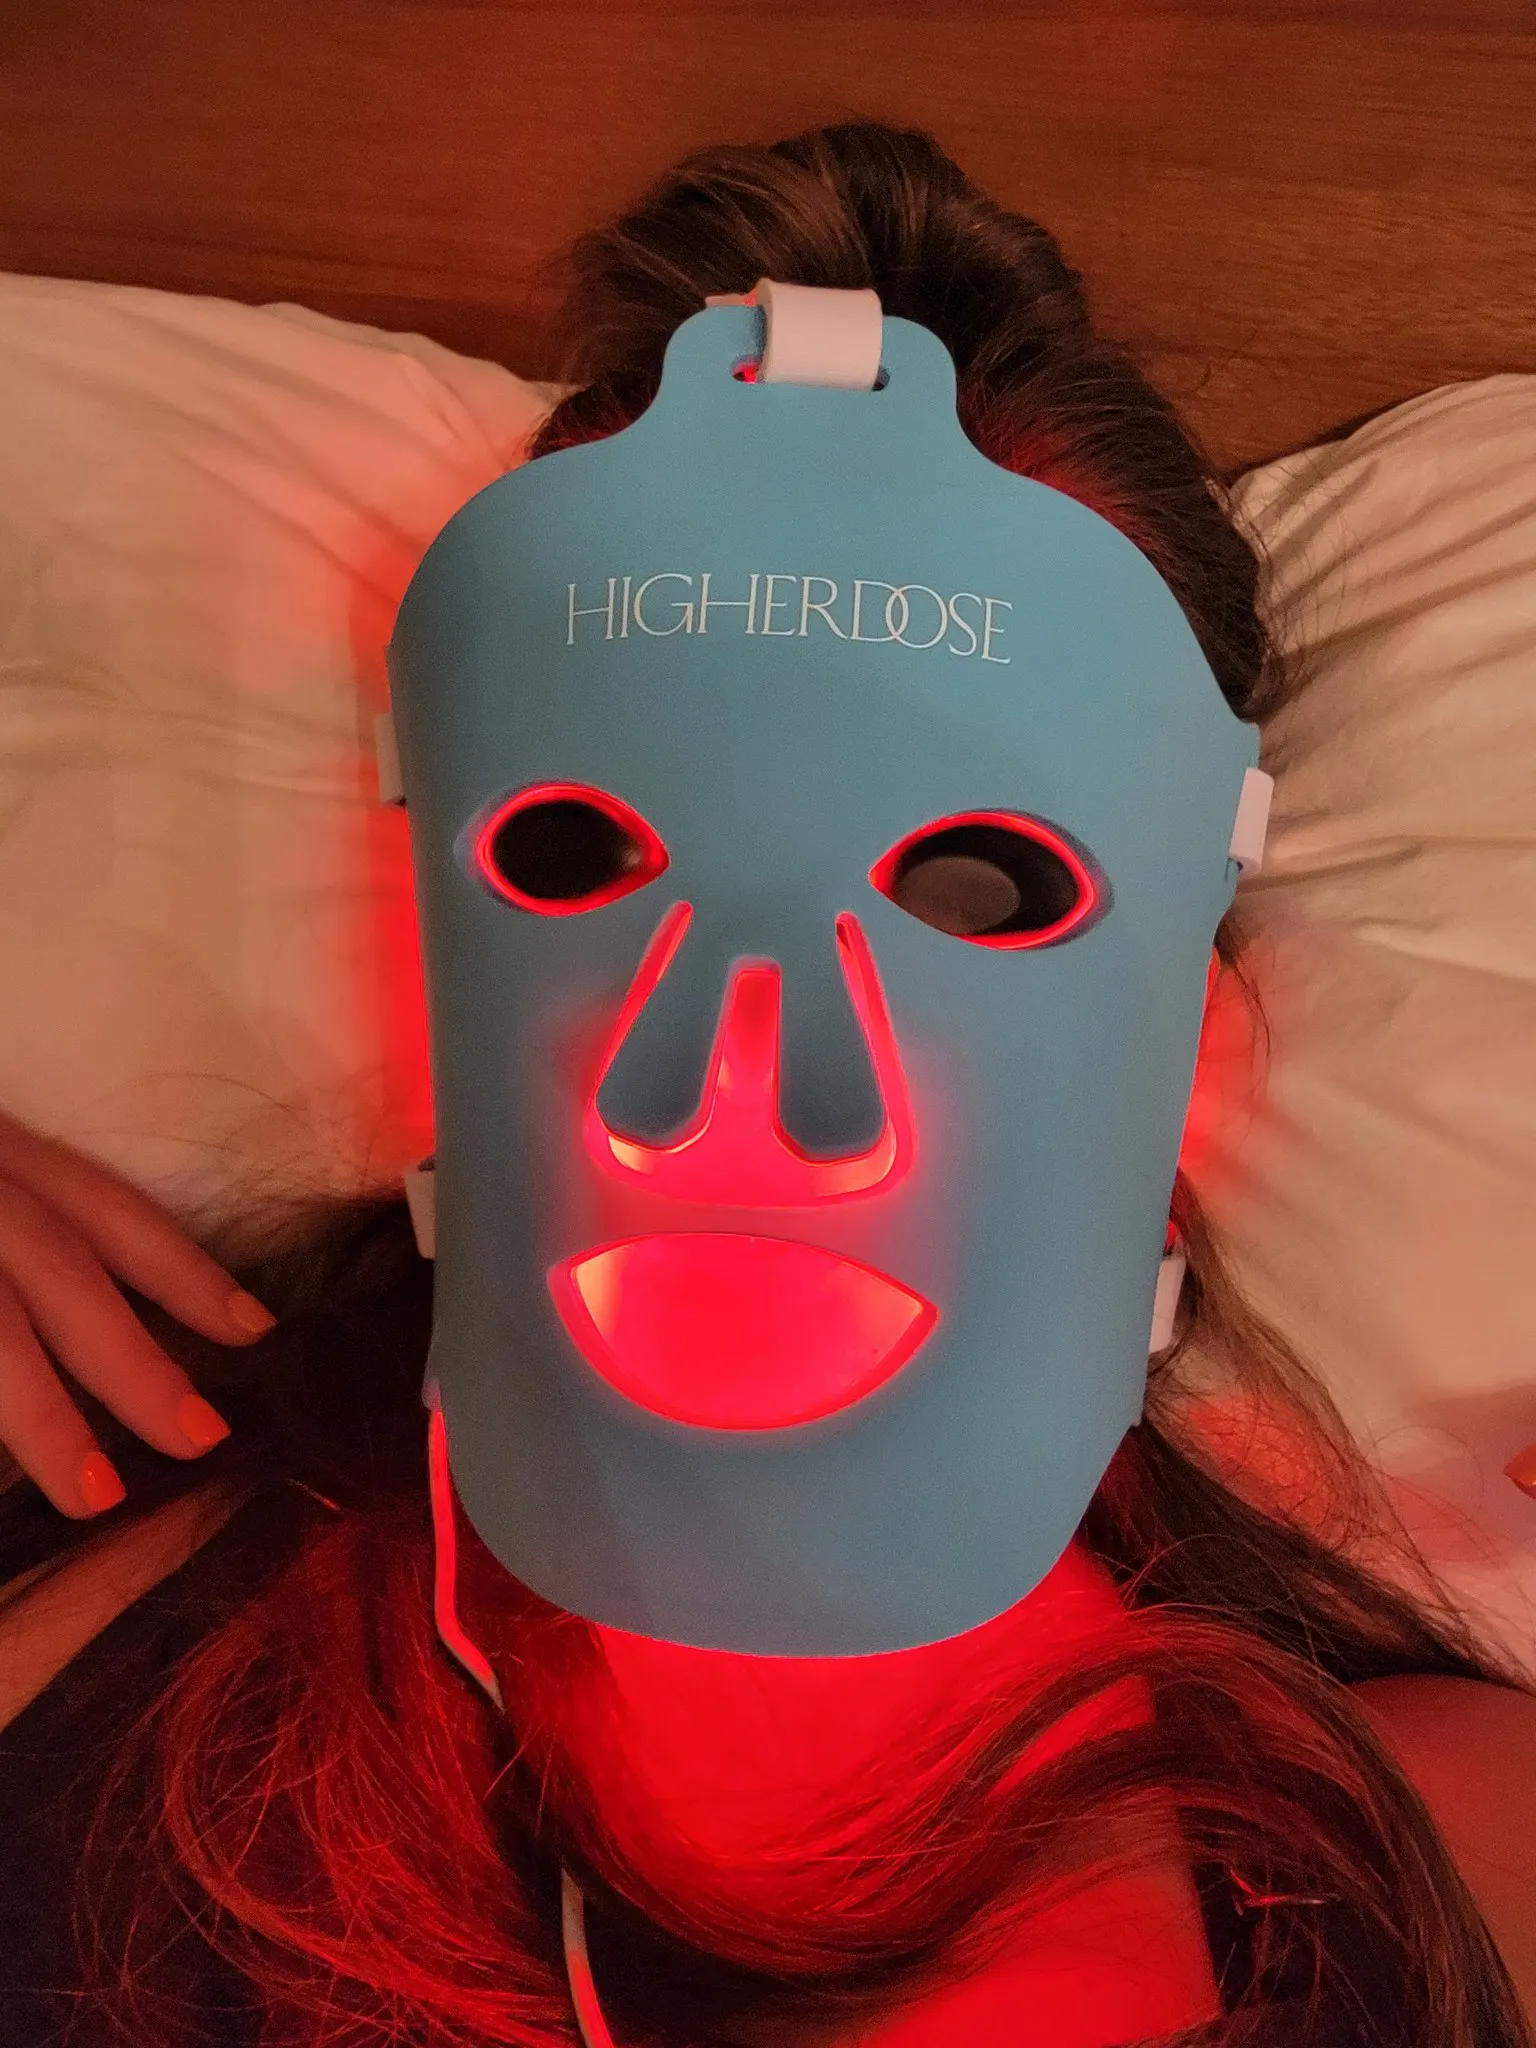 LED Mask: My Favorite Products of 2021 and Readers' Favorites